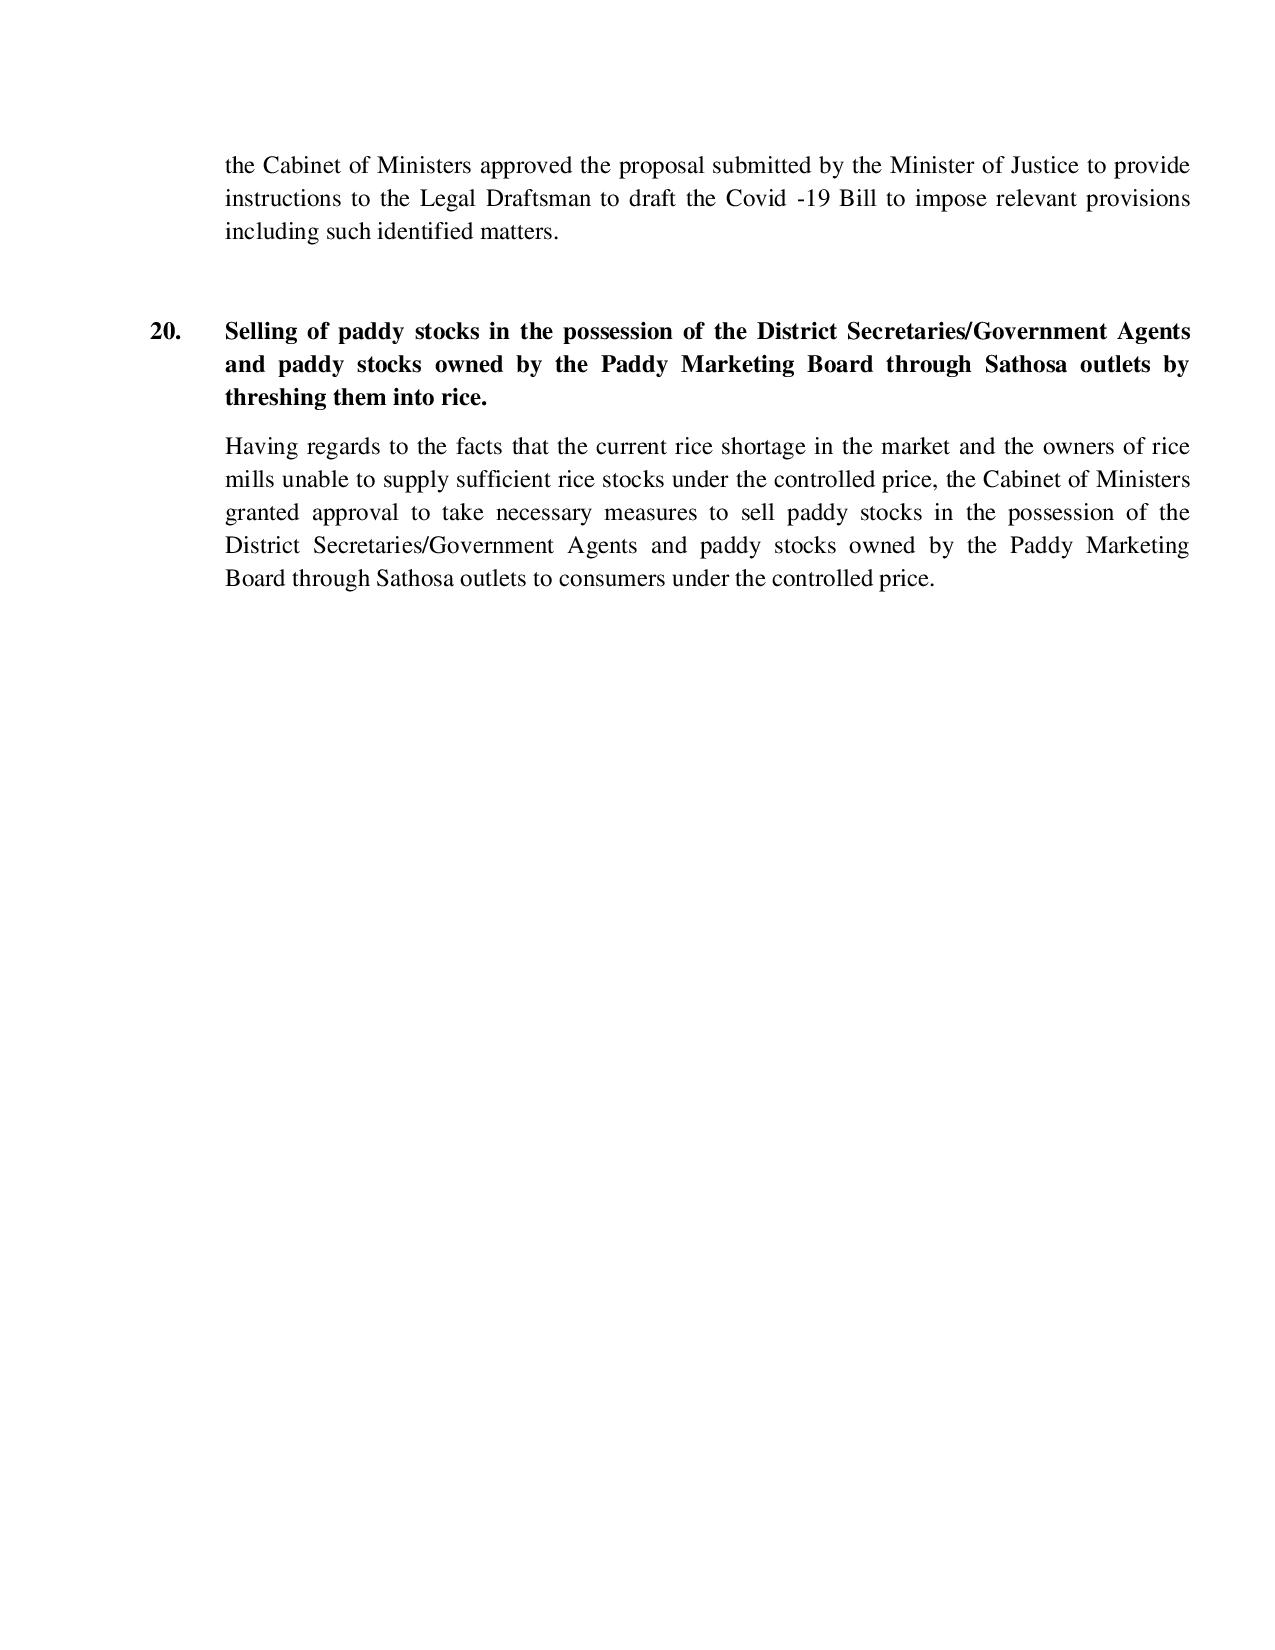 Cabinet Decision on 09.11.2020 English page 007